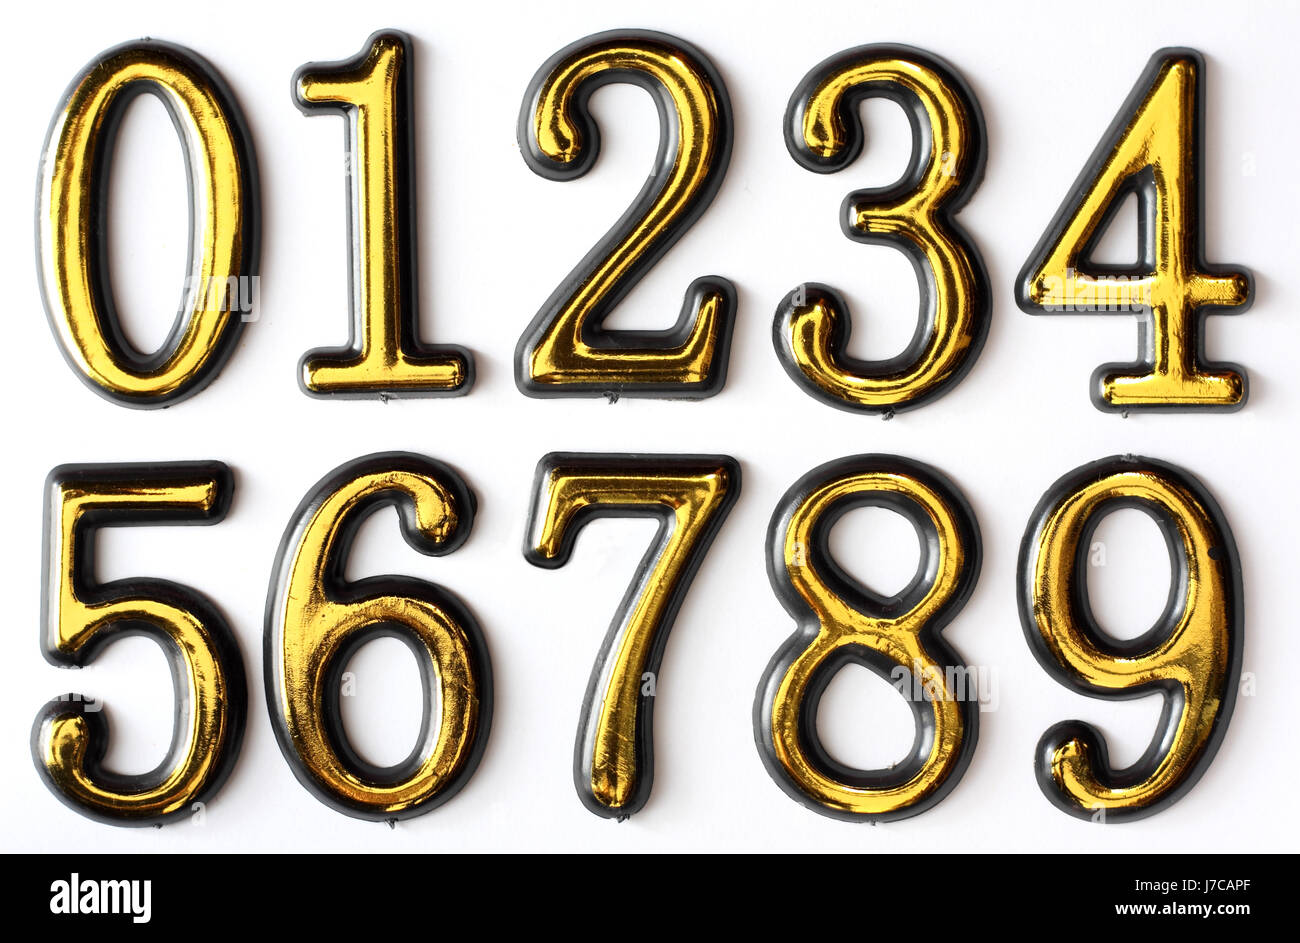 Golden One Zero Nine Sequence Numbers Isolated Science Five Black Stock Photo Alamy